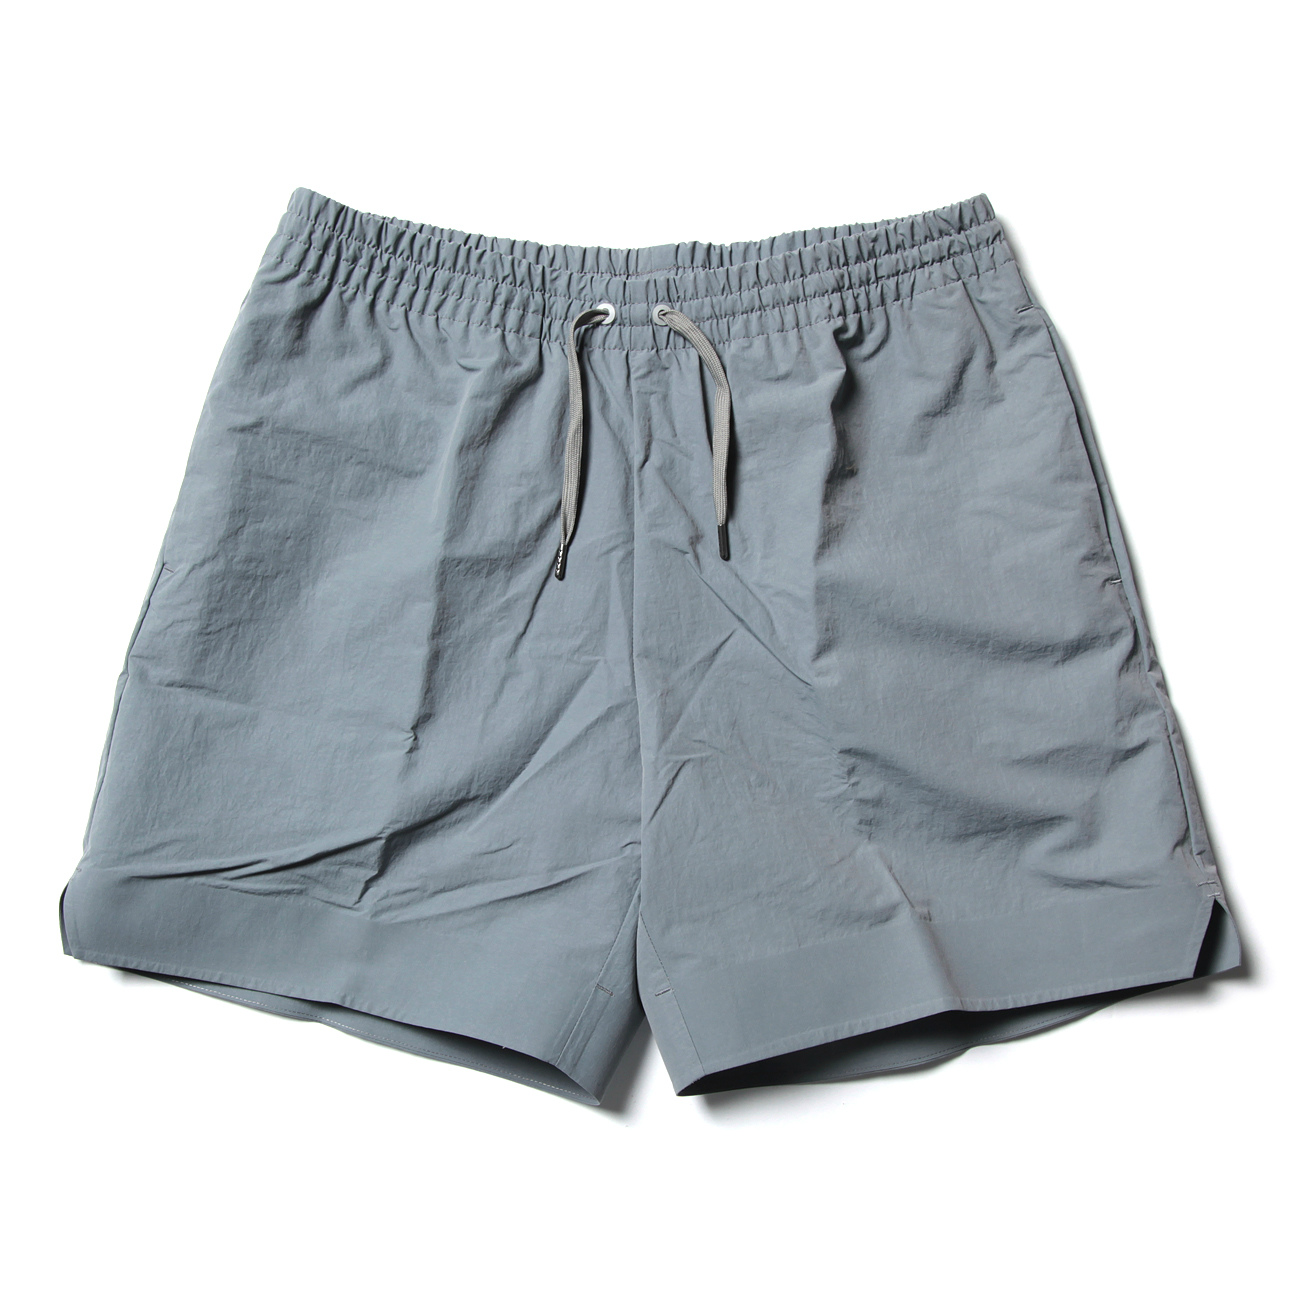 DESCENTE PAUSE / デサントポーズ | SLIT SHORTS - A.Gray | 通販